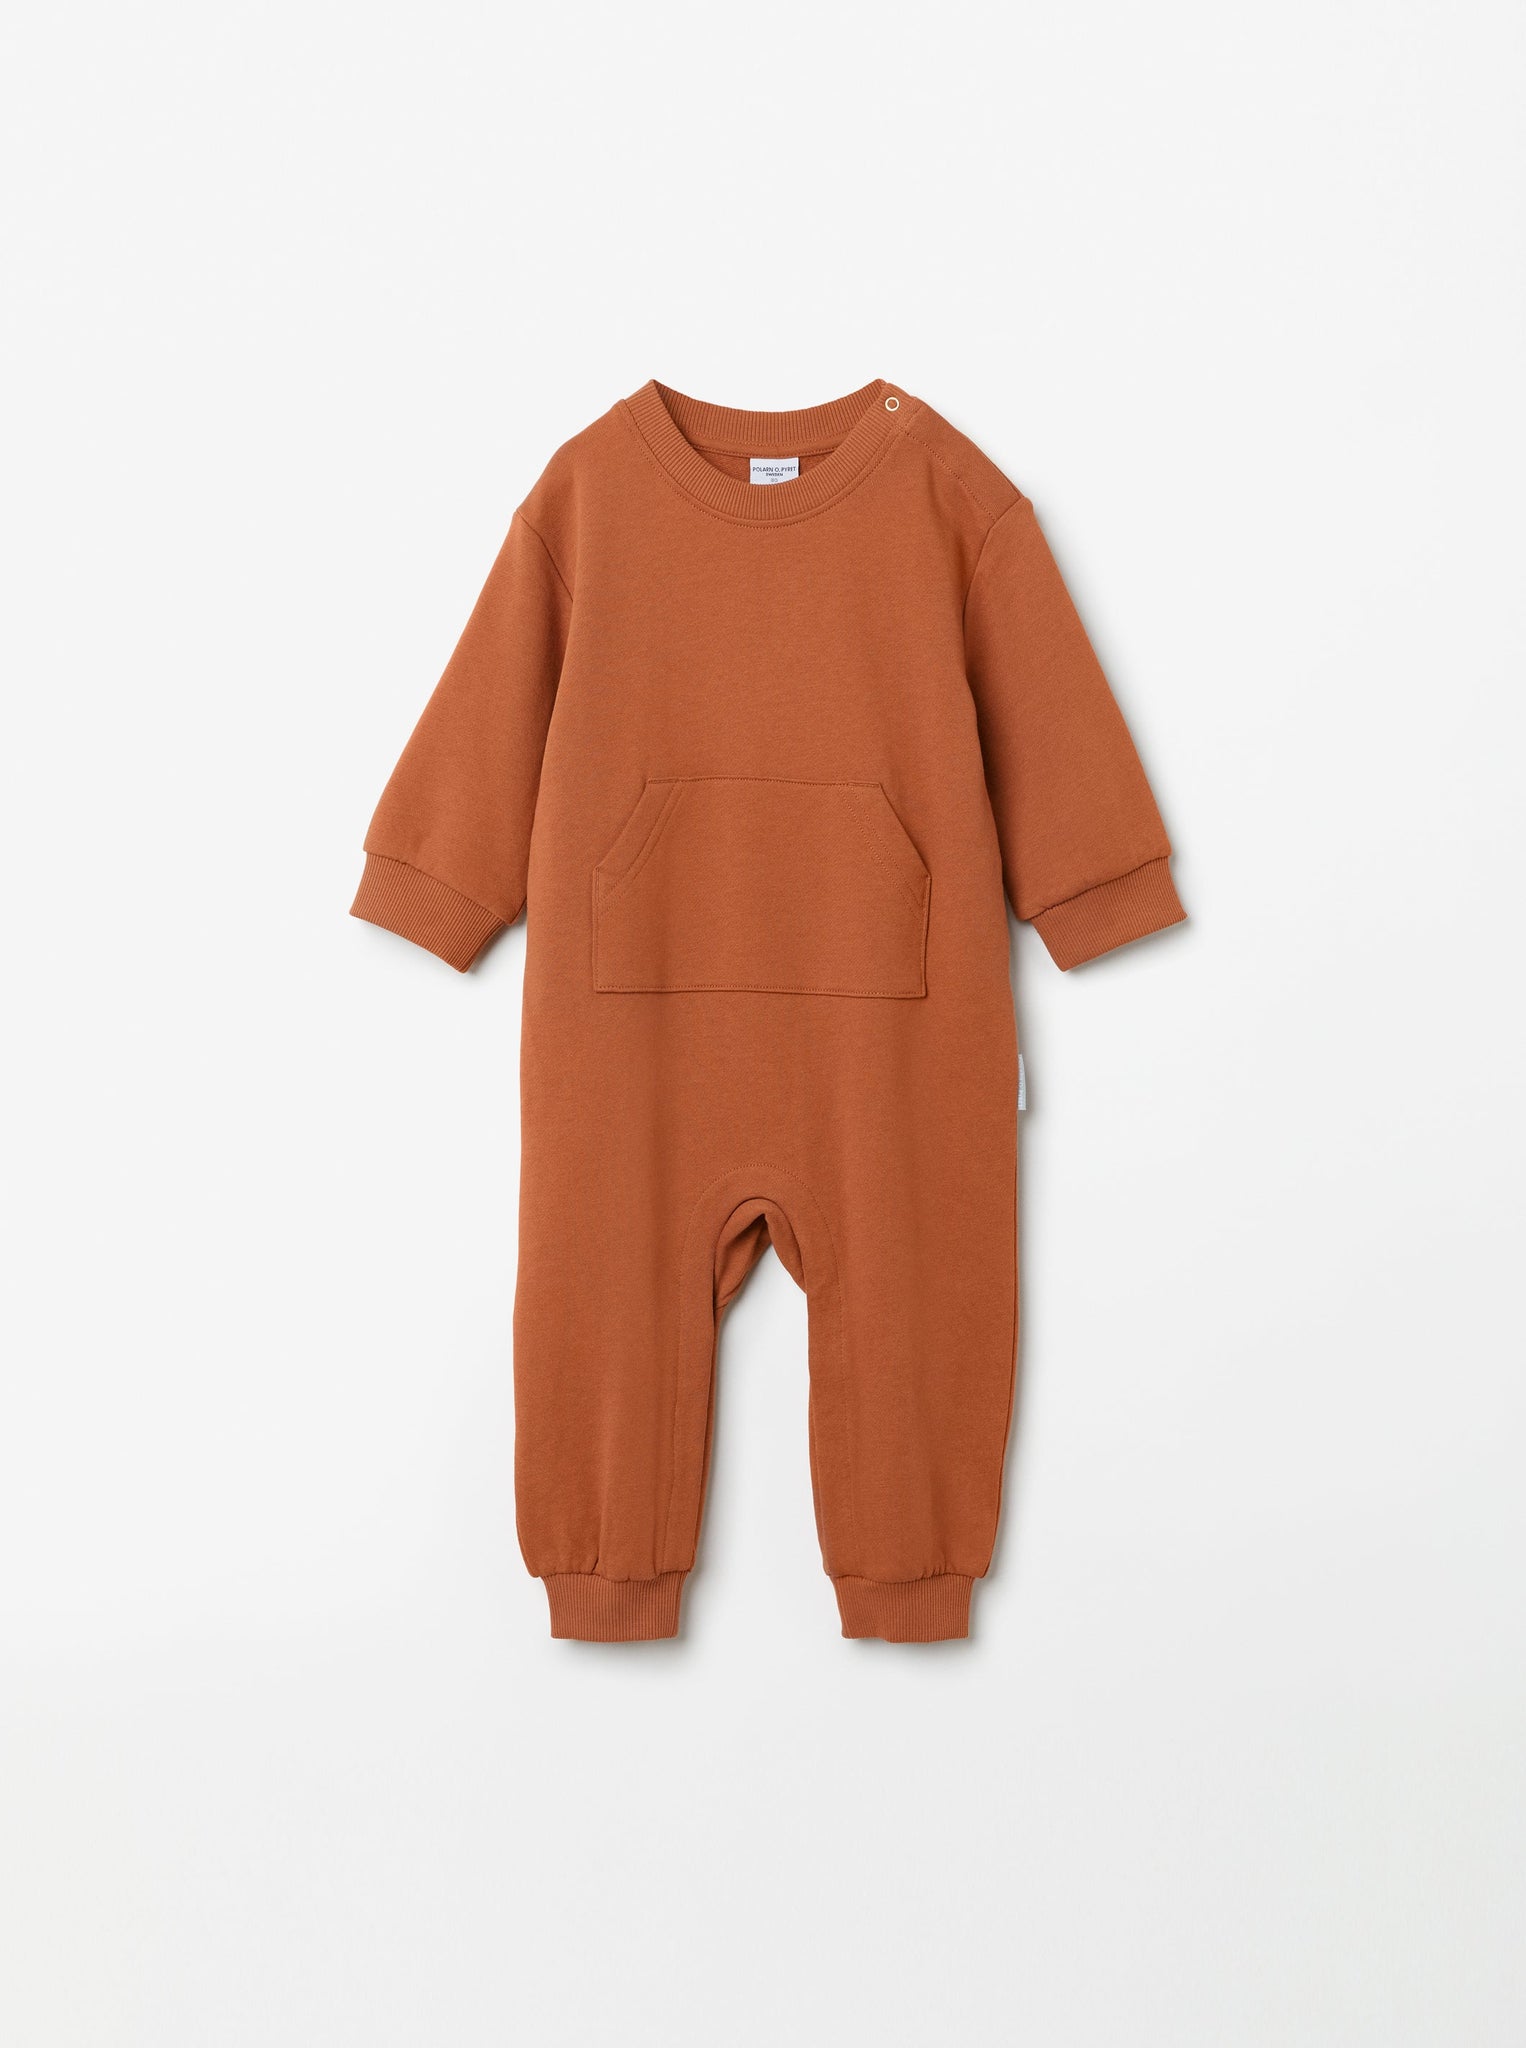 Organic Cotton Orange Baby Romper from the Polarn O. Pyret babywear collection. Ethically produced baby clothing.